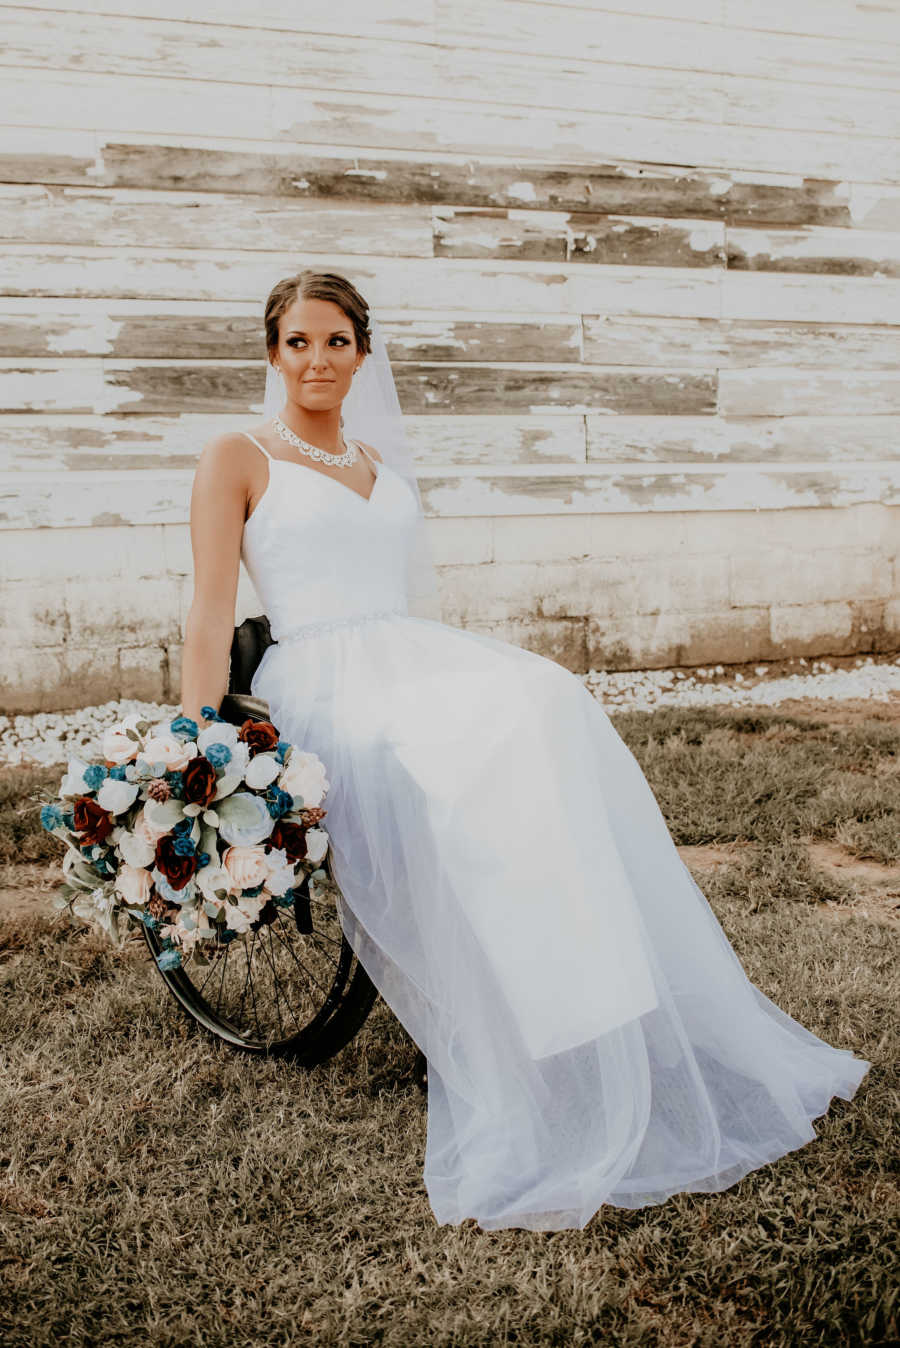 Paralyzed bride sits in wheelchair holding bouquet of flowers